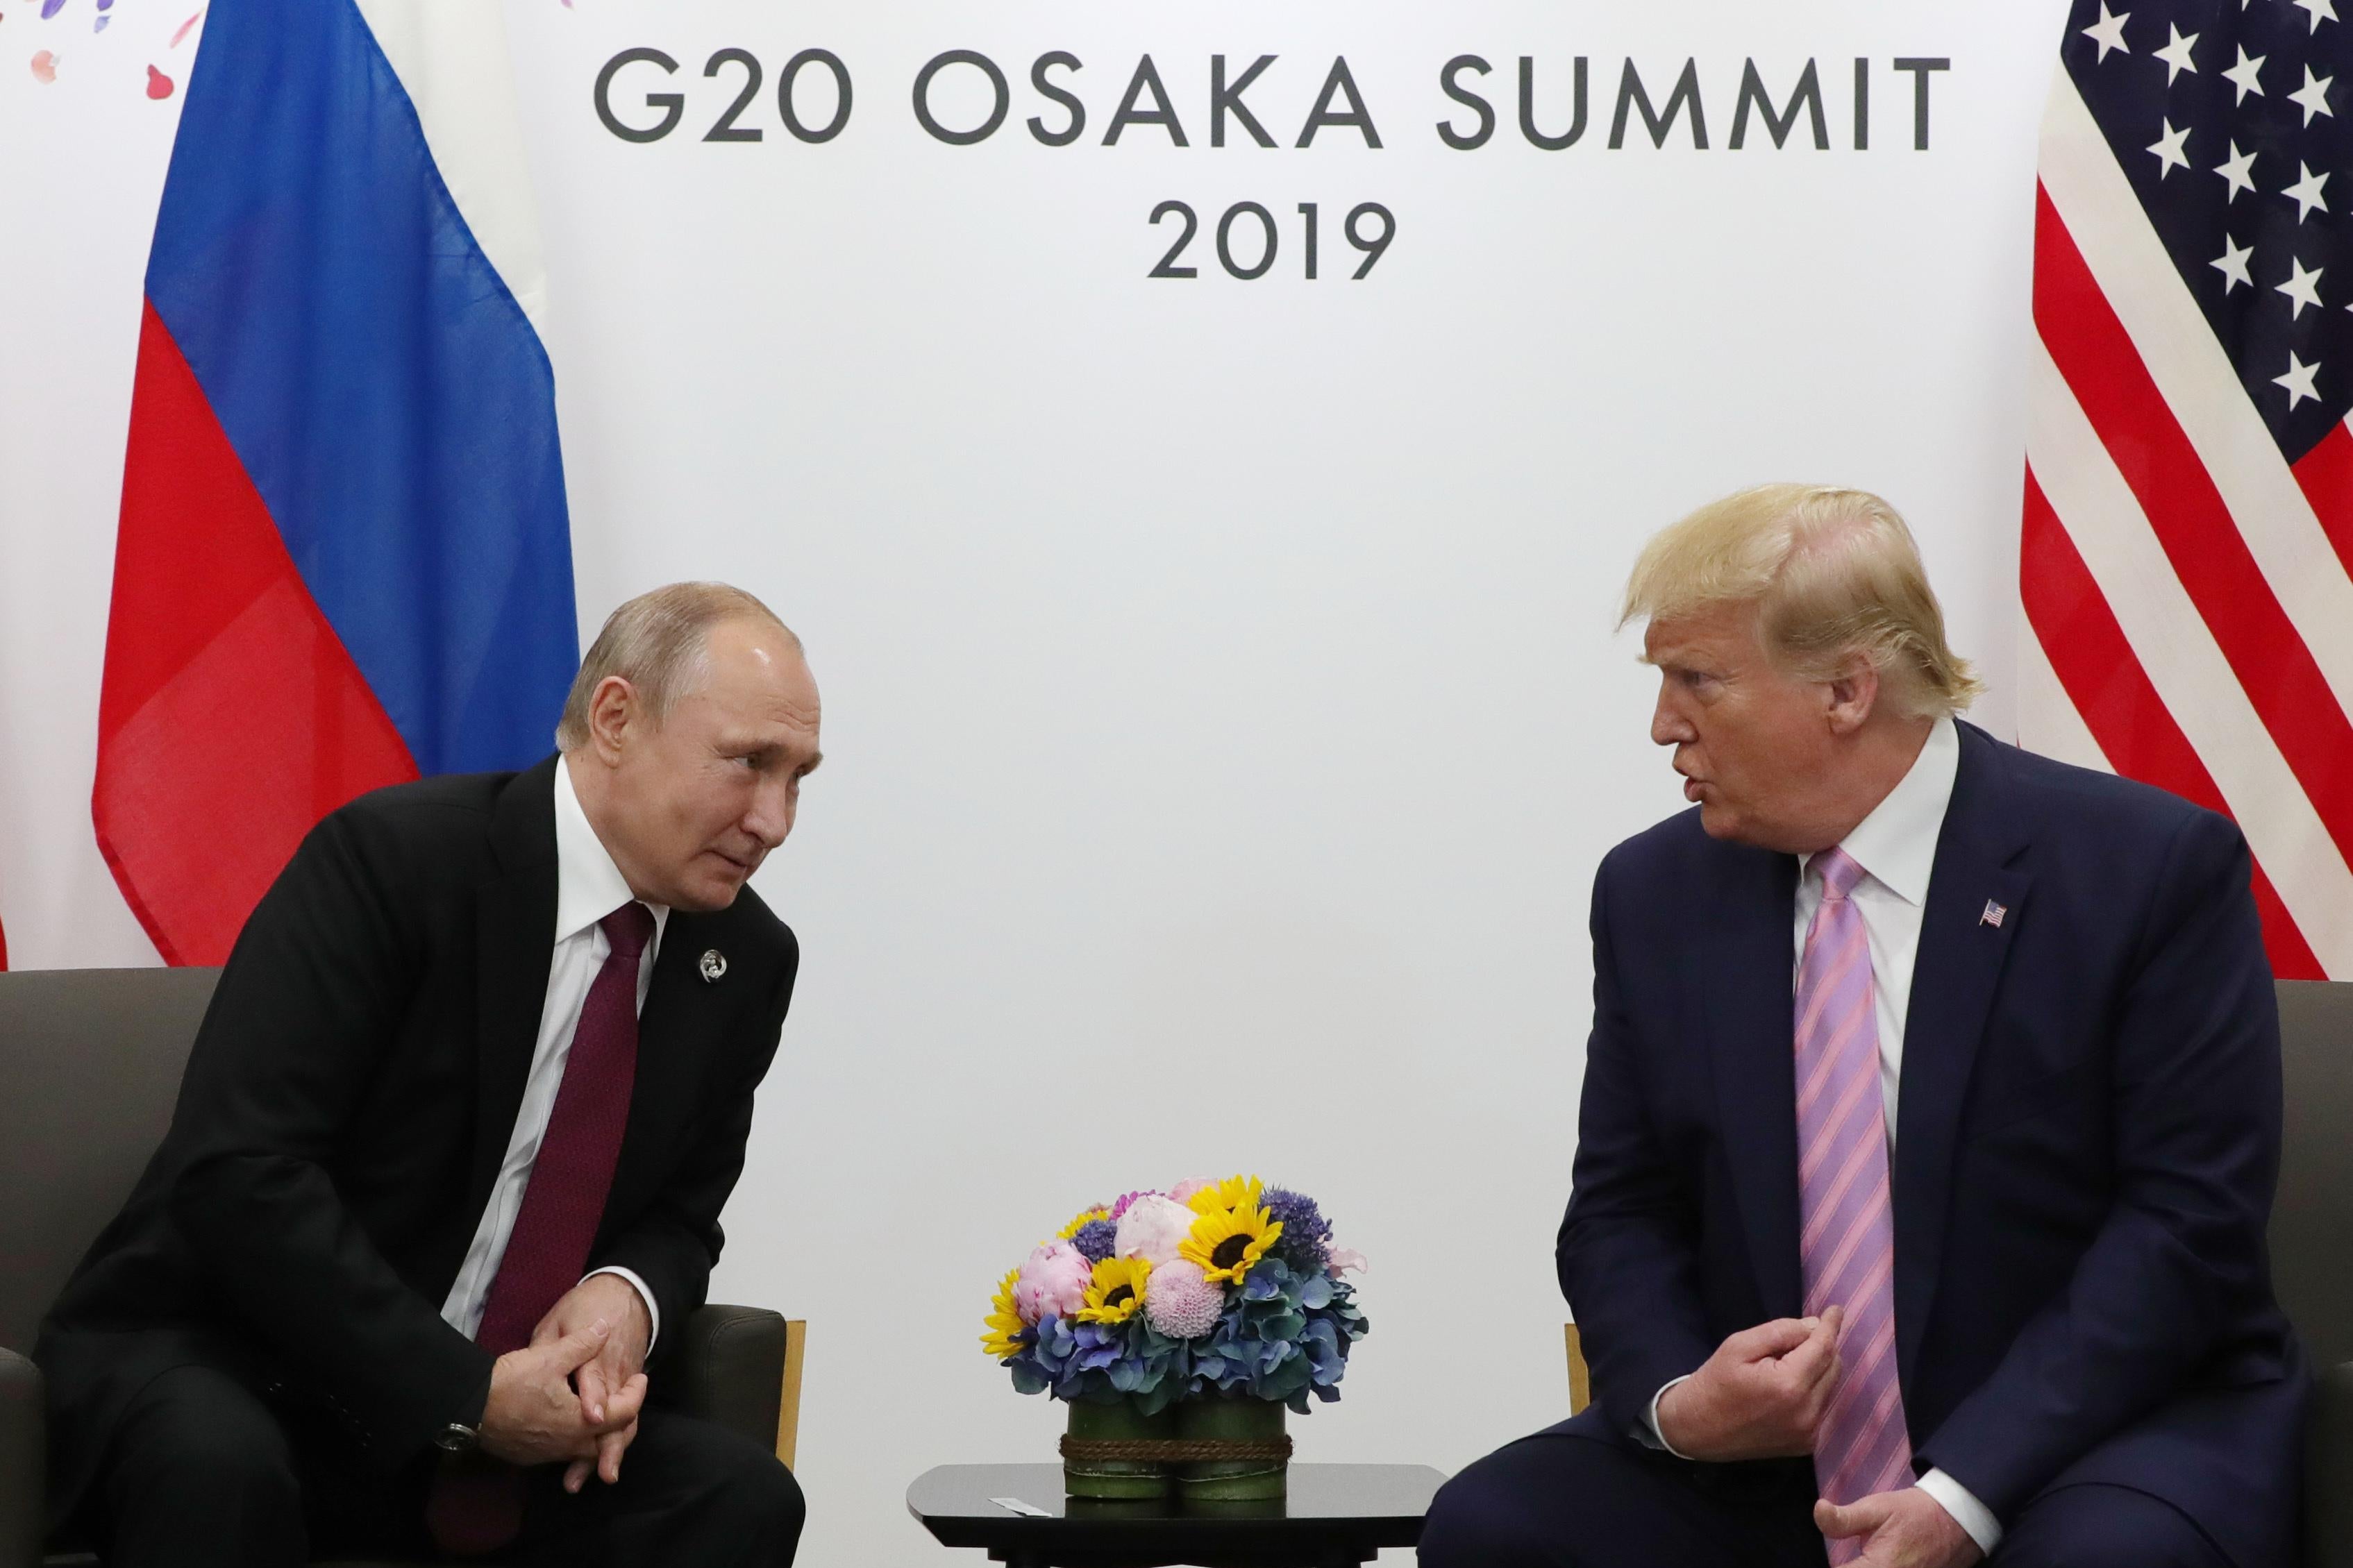 Putin and Trump, seated side-by-side, lean in to speak to one another at a summit.